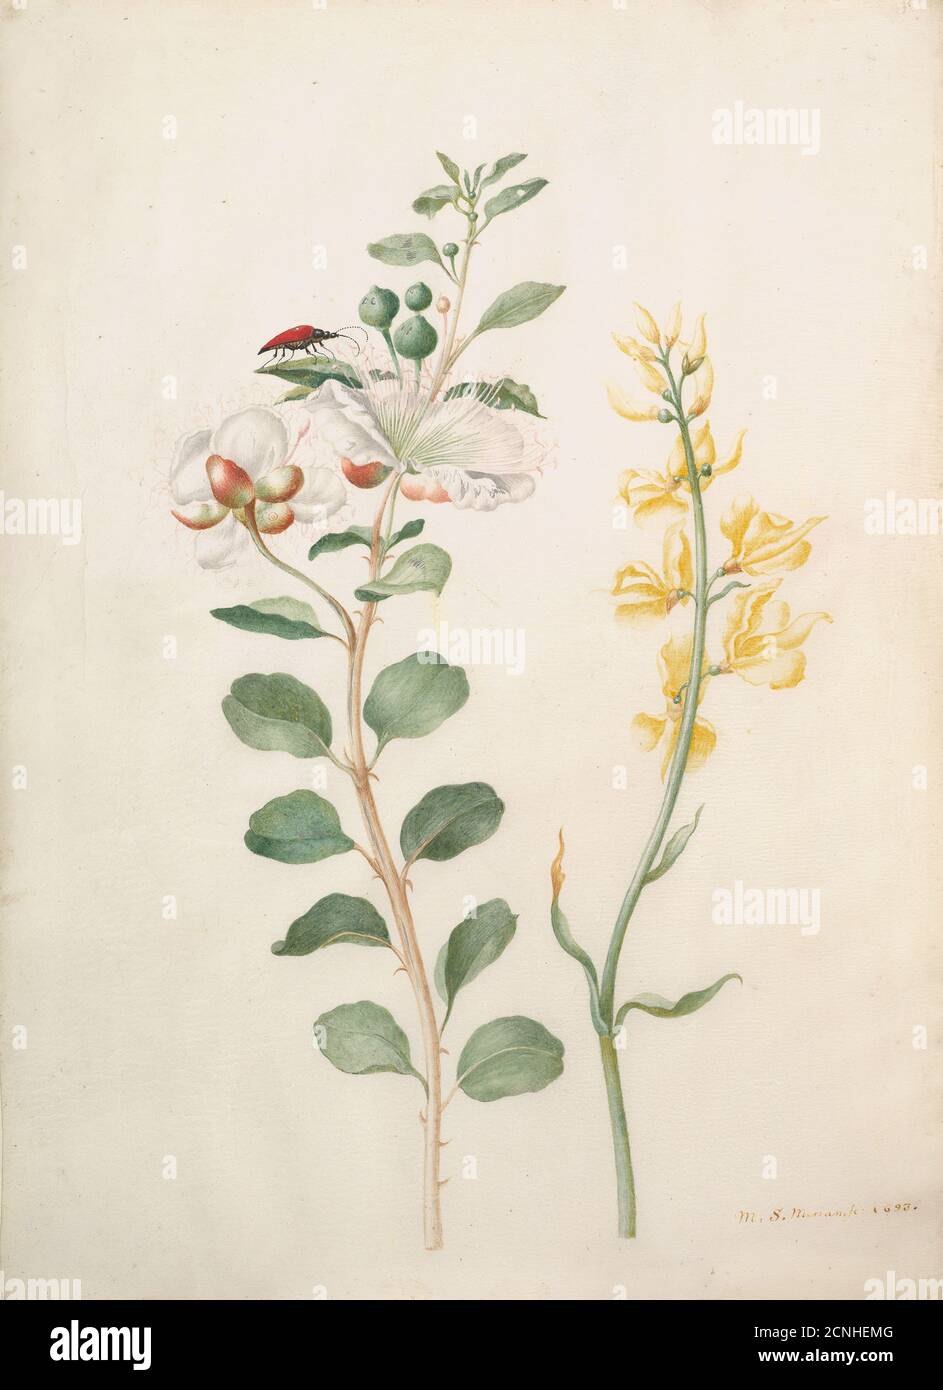 Study of Capers, Gorse, and a Beetle, 1693. Stock Photo